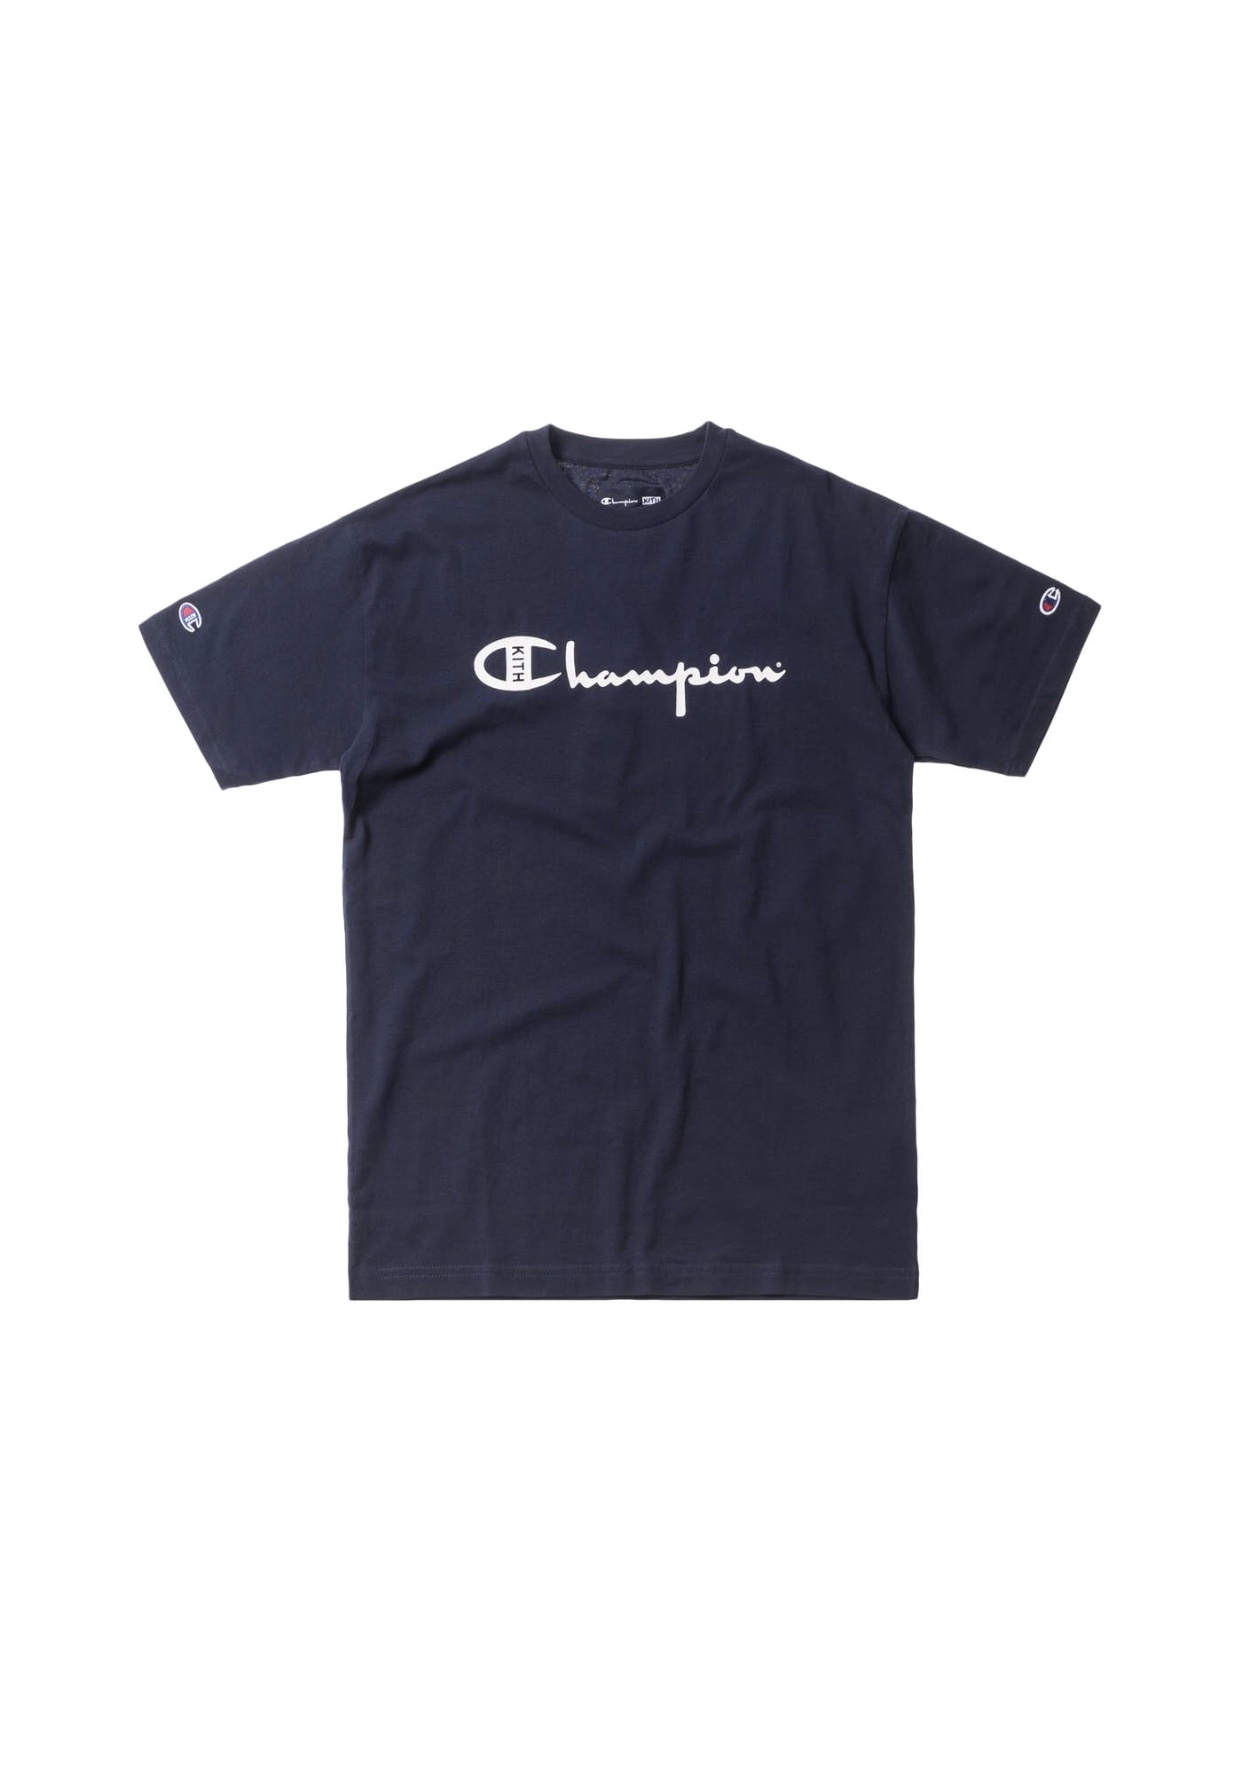 Champion Kith Tee Top Sellers, 56% OFF | lagence.tv